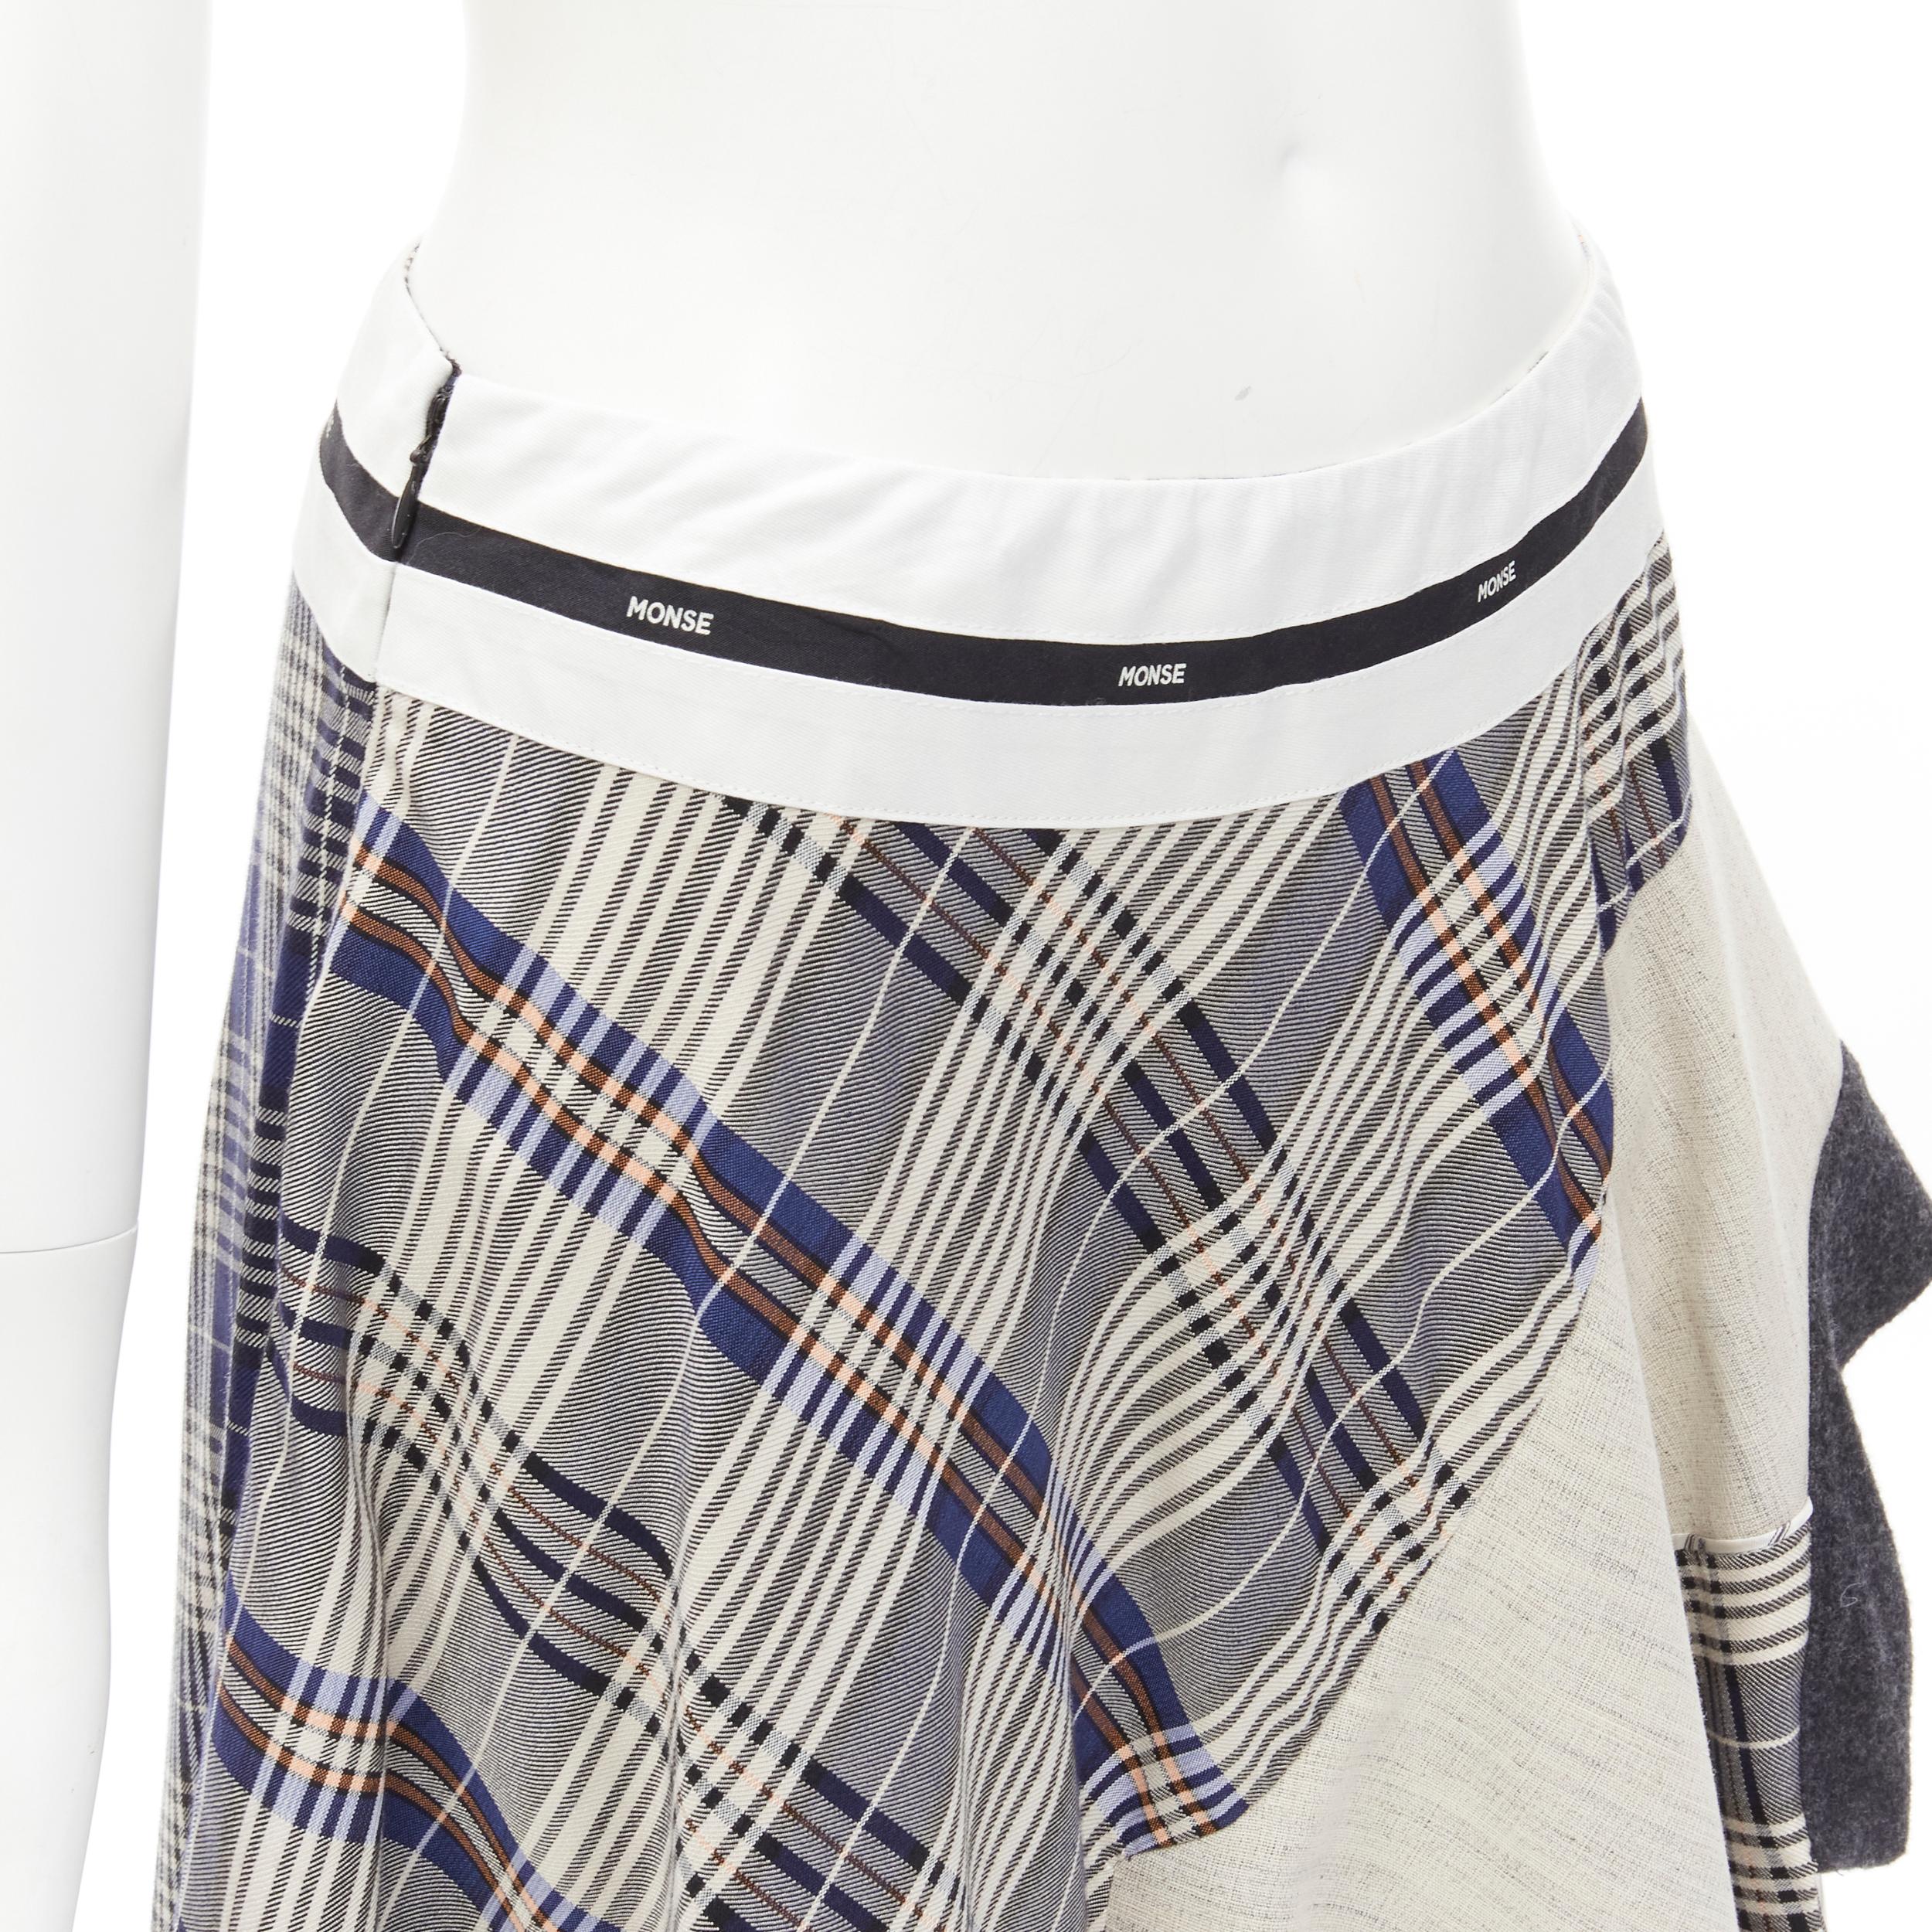 MONSE Runway mixed plaid patchwork asymmetric skirt US2 S
Brand: Monse
Material: Acetate
Color: Brown
Pattern: Plaid
Closure: Zip
Extra Detail: Logo trim at waistband. Asymmetric hemline with contrast 'lining' fabric layered.
Made in: United